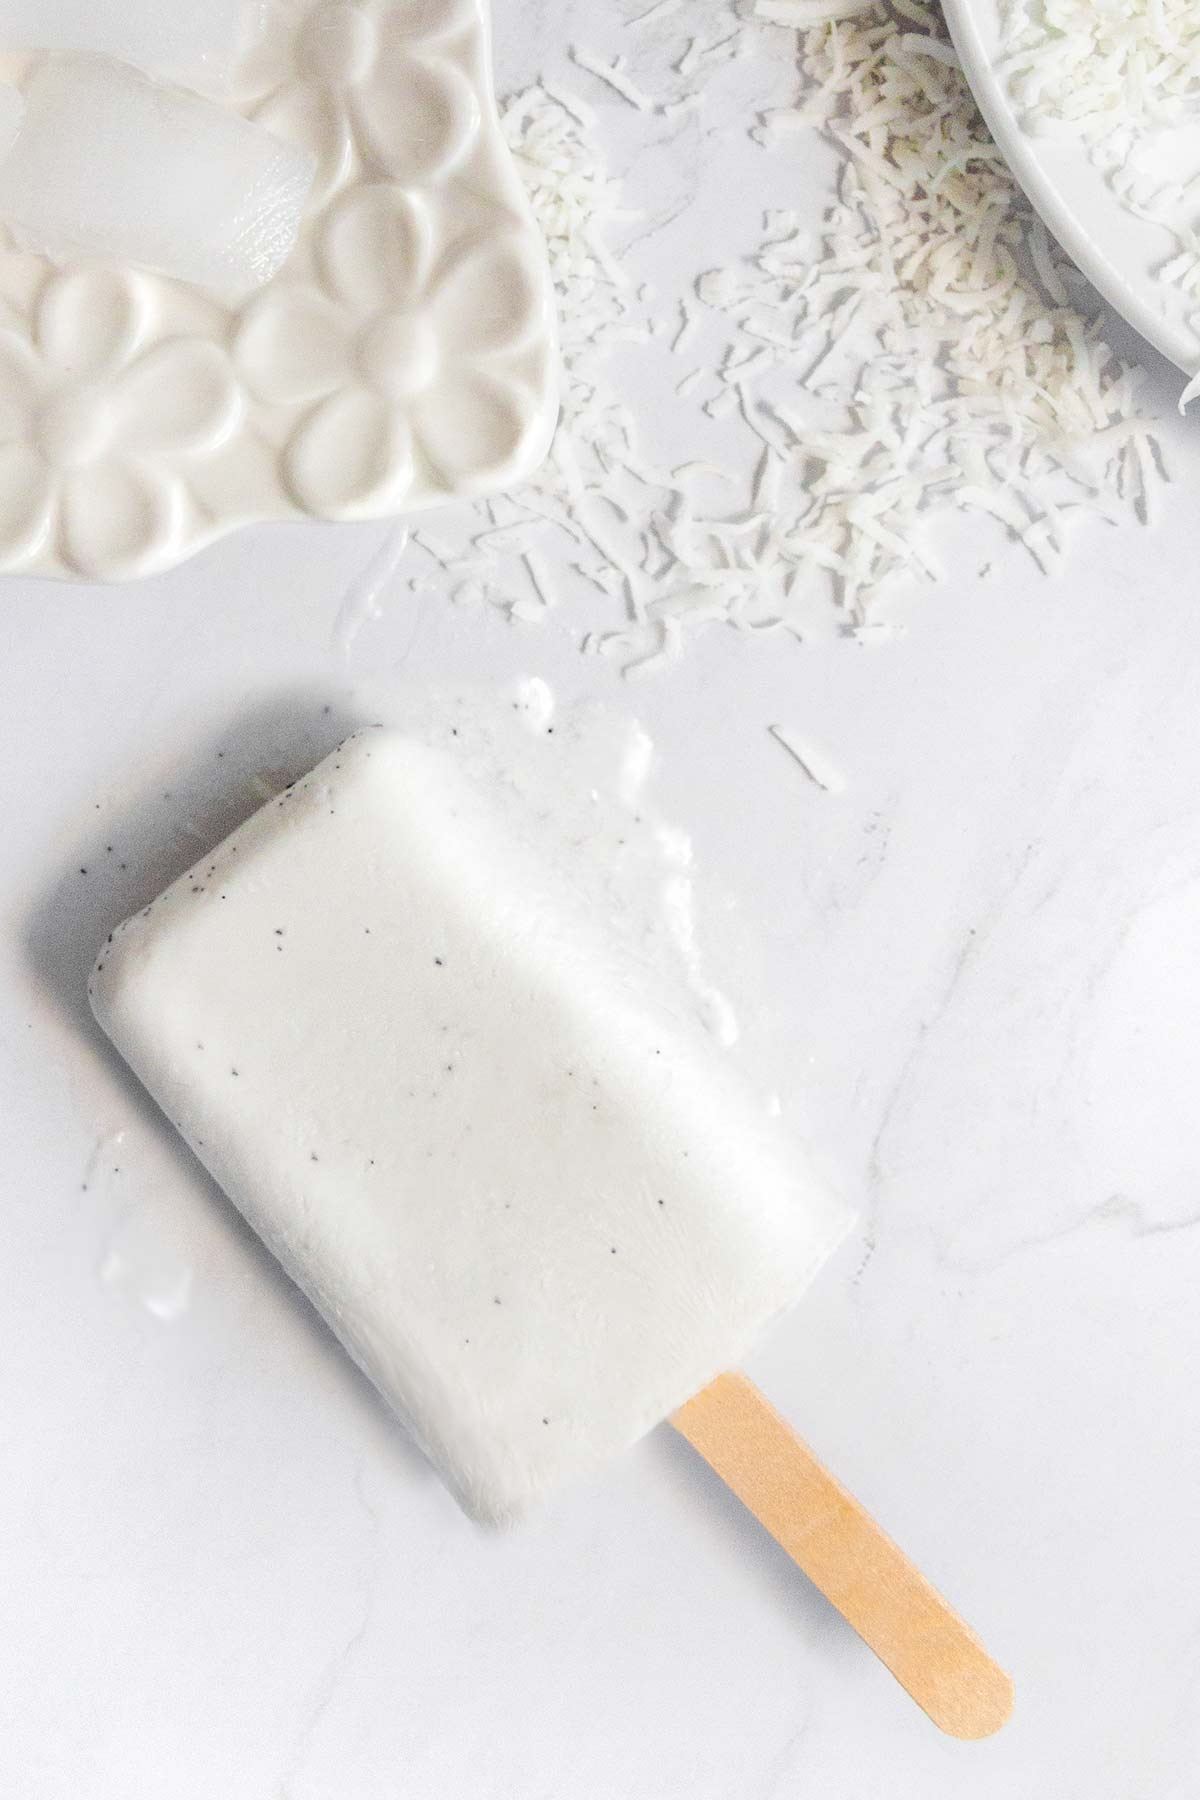 A coconut milk popsicle on a marble slab.